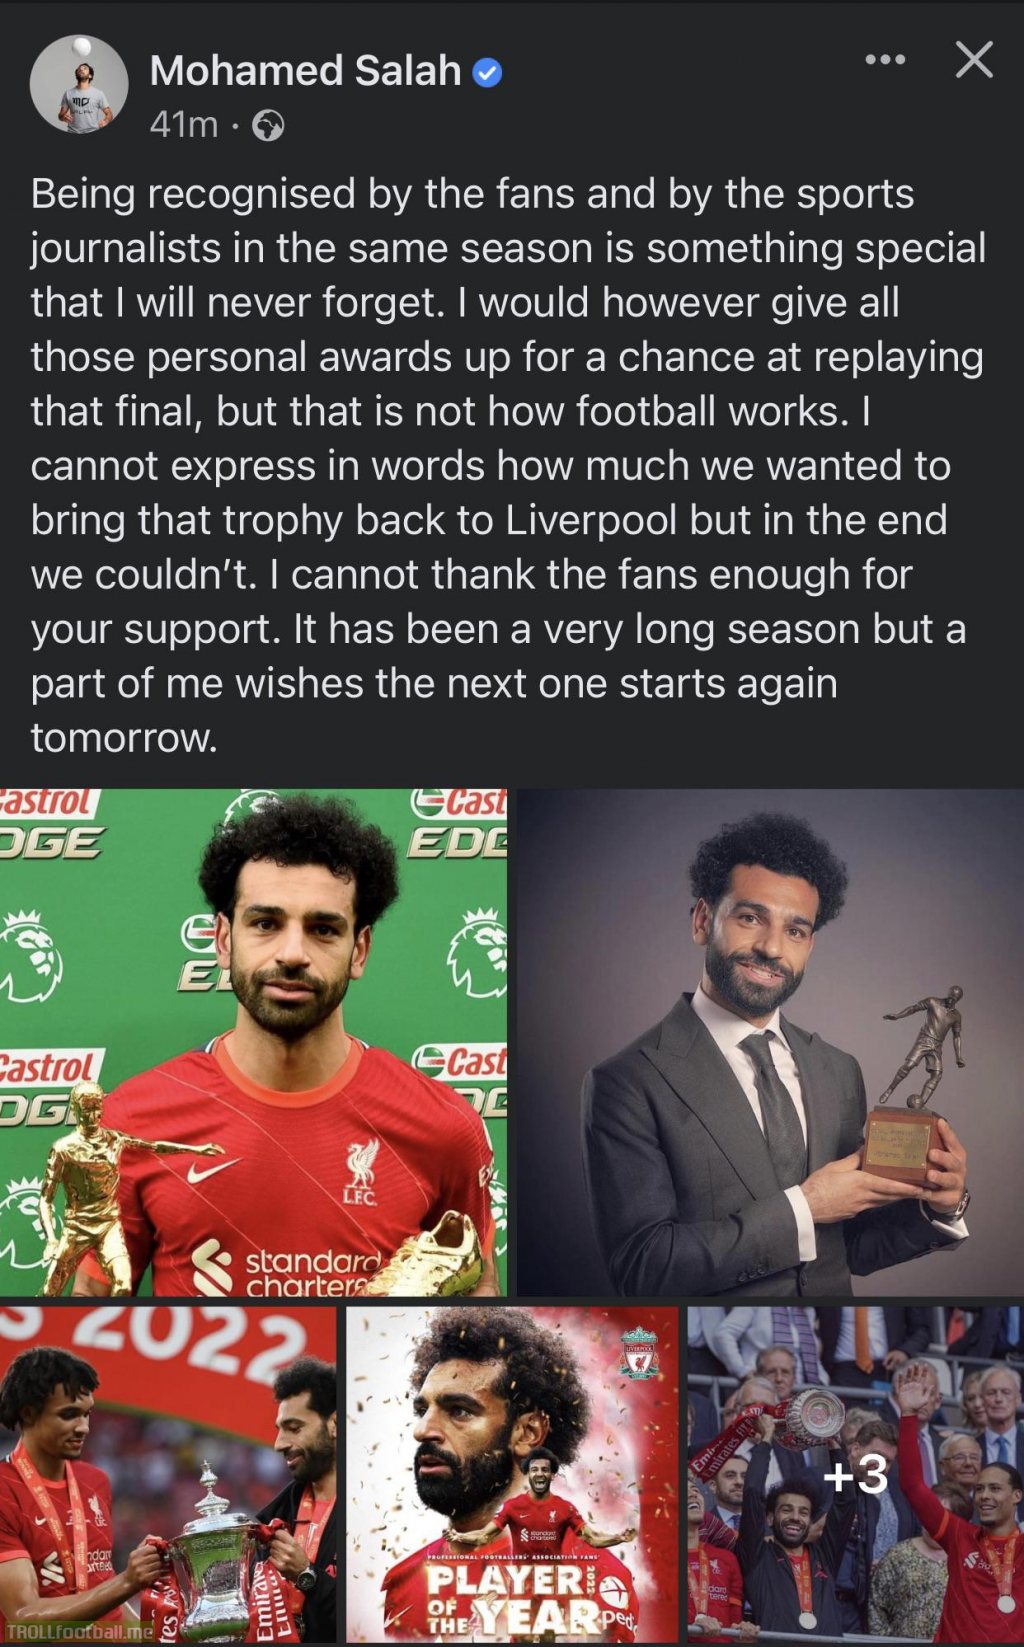 [Mohamed Salah] Being recognised by the fans and by the sports journalists in the same season is something special that I will never forget. I would however give all those personal awards up for a chance at replaying that final, but that is not how football works.